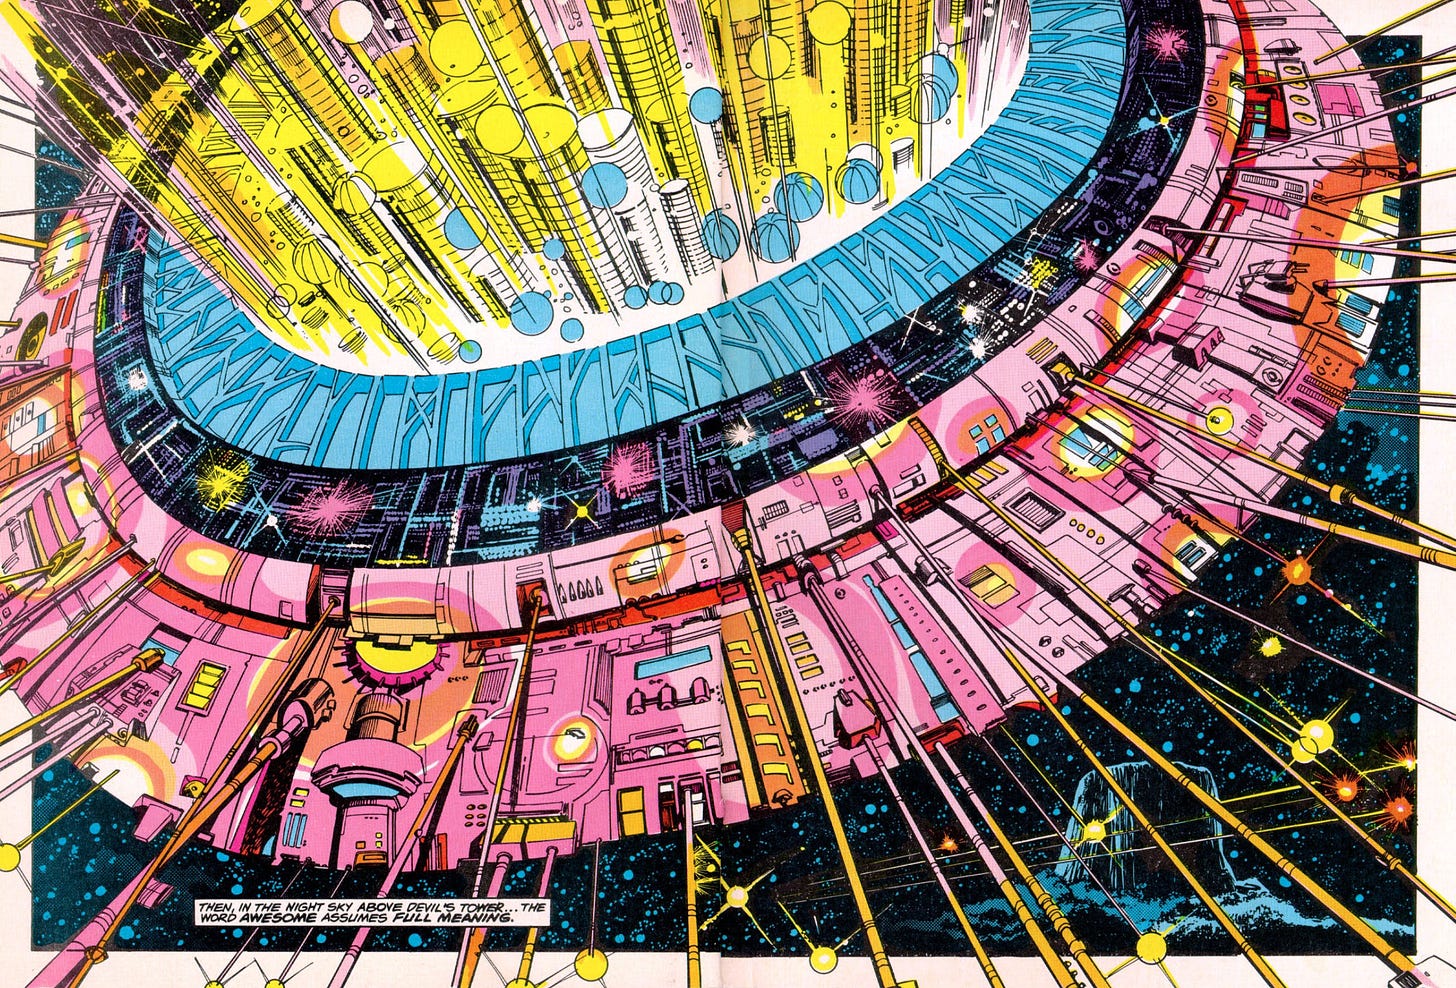 Double splash page of a huge flying saucer, yellow, blue, and pink in color, with Devil's Tower and the night sky in the background